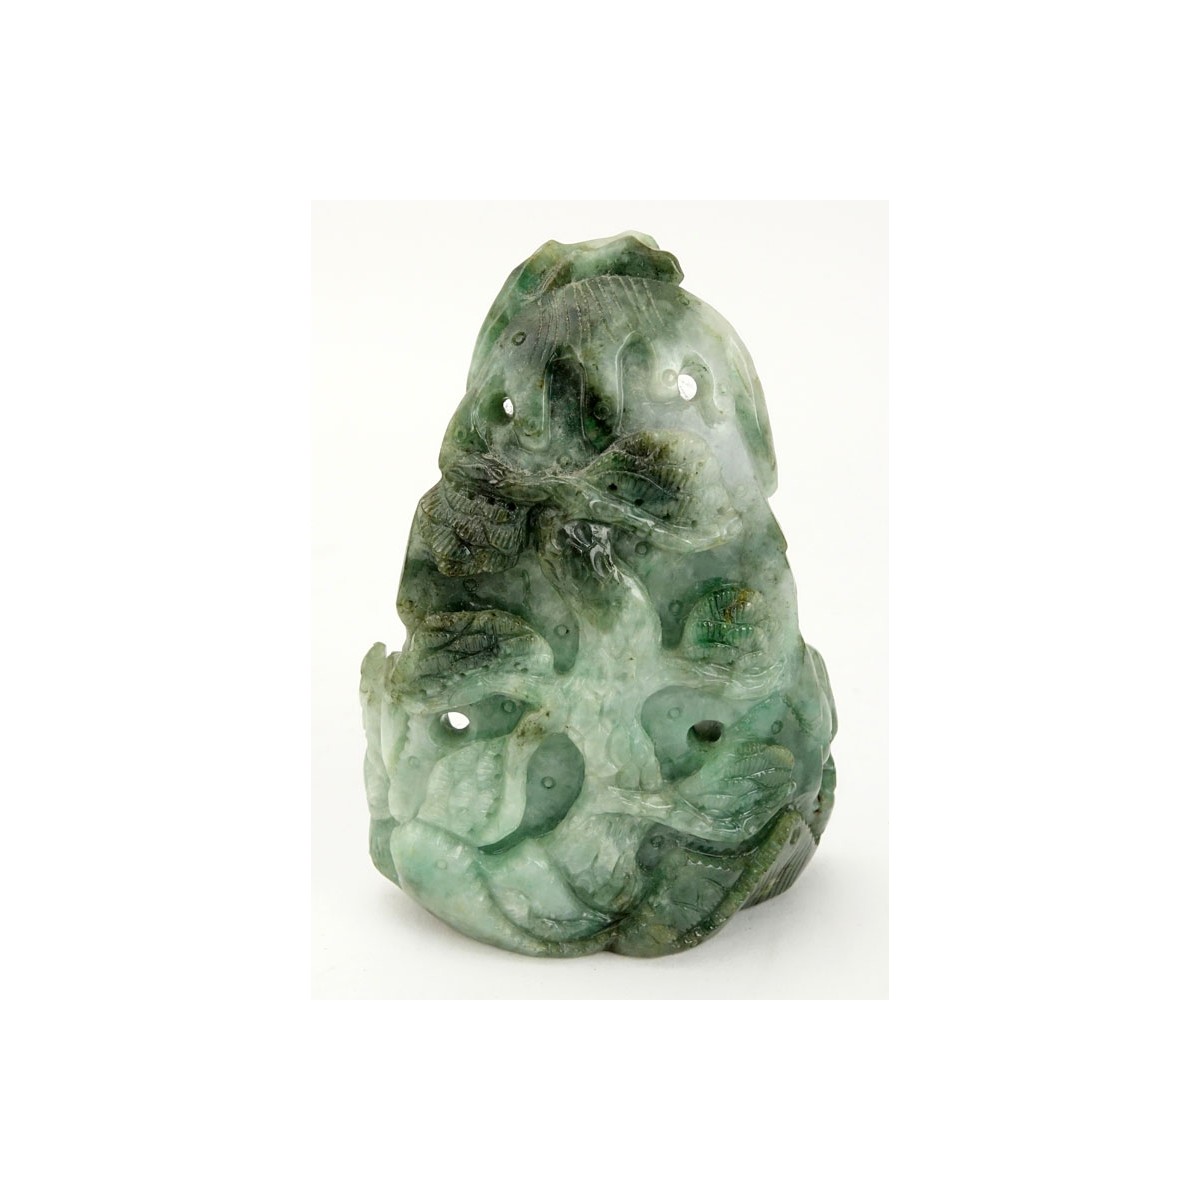 Chinese Carved Jade Shou Lao Figurine. Depicted holding staff and scepter. Light to dark green in c